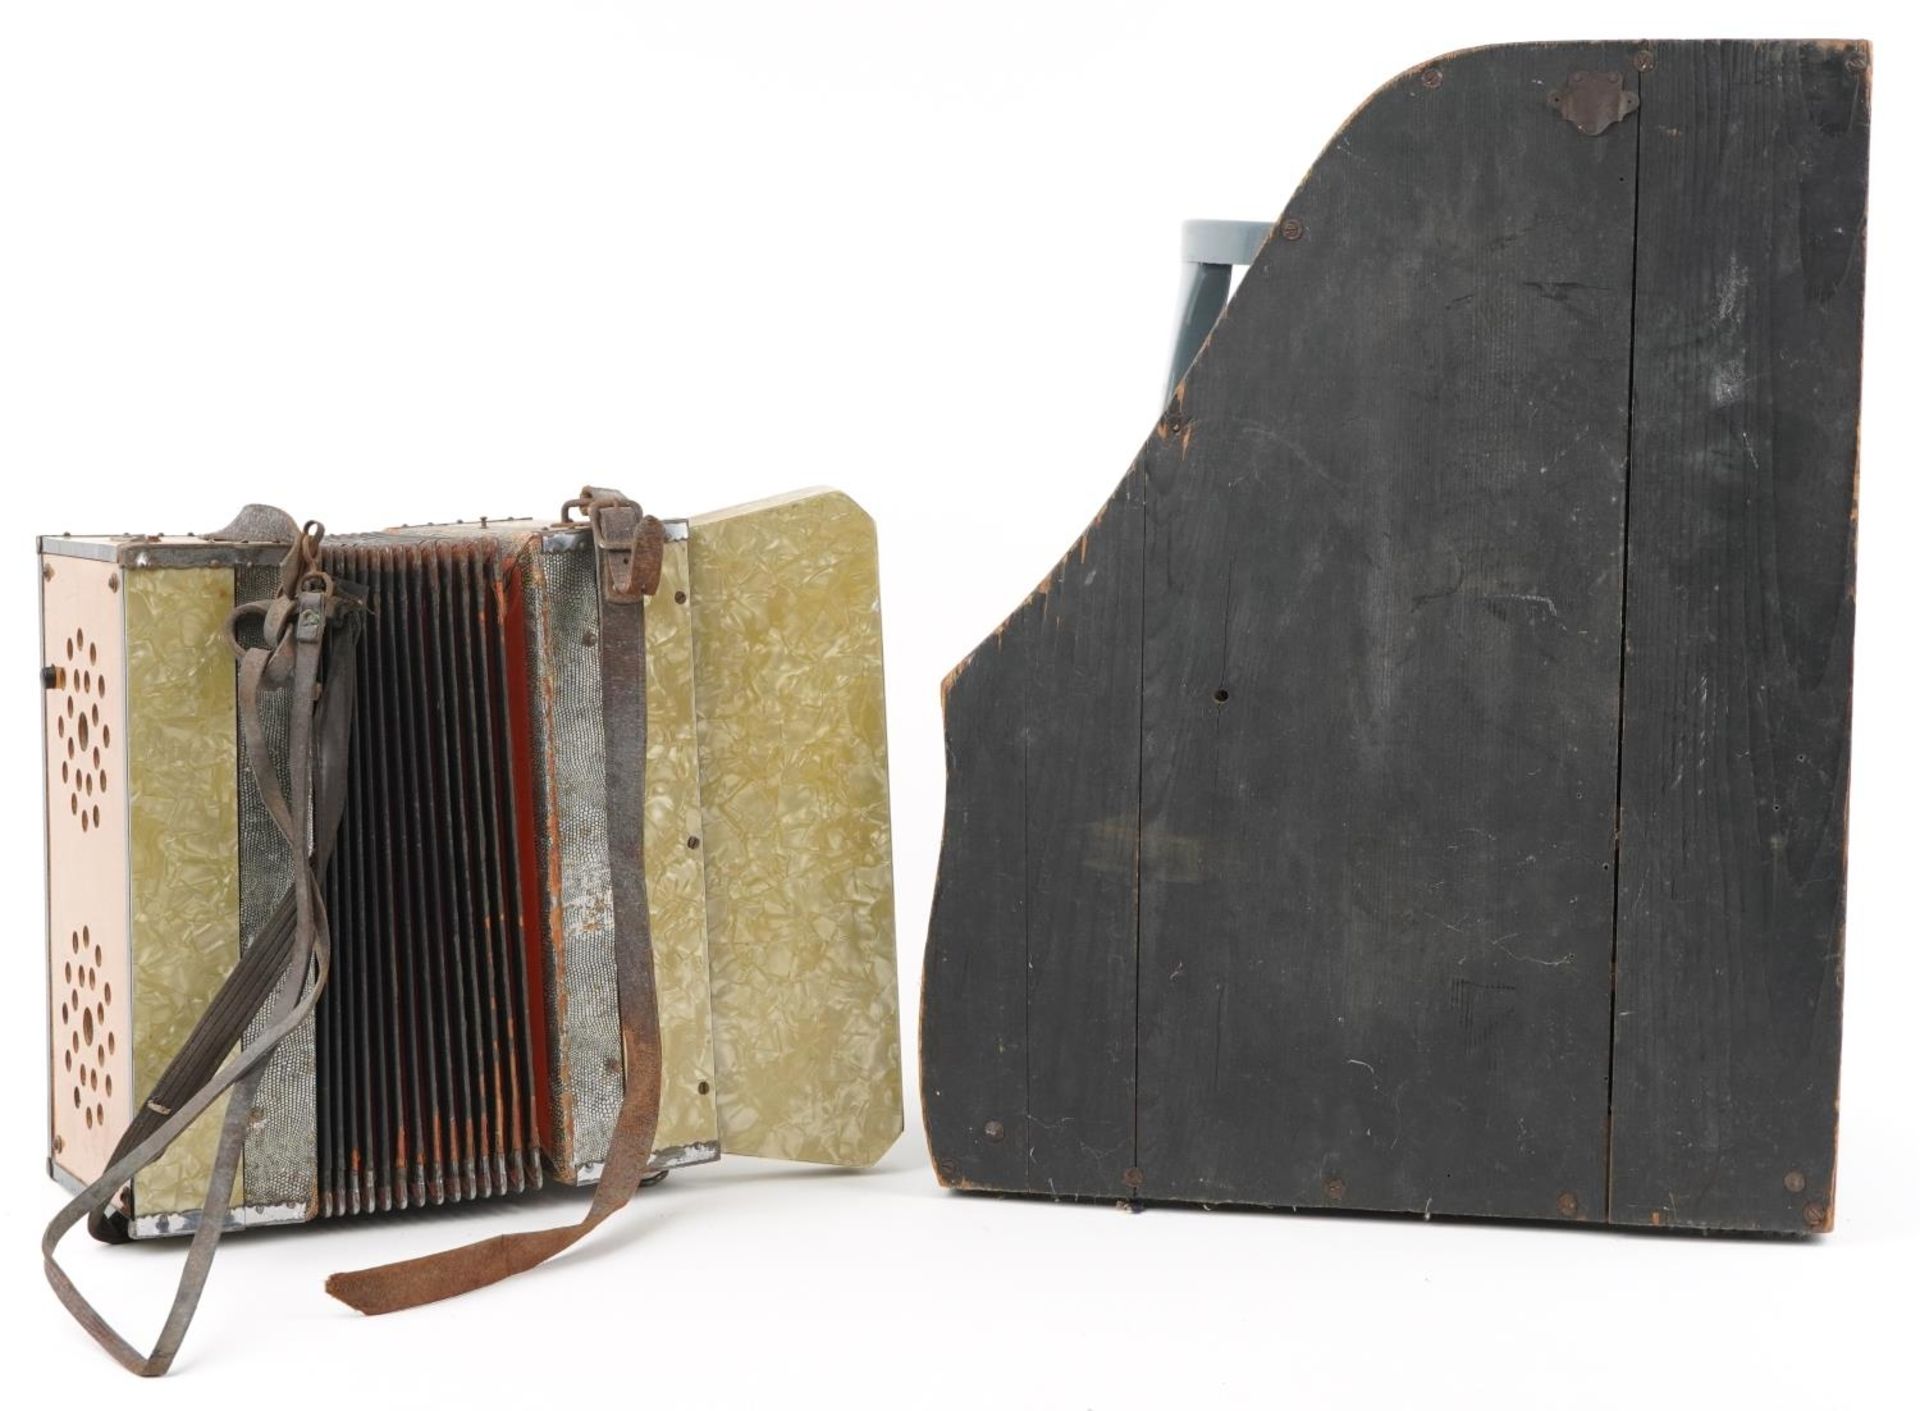 Two vintage German musical instruments comprising a Majestic accordion and ebonised zither - Bild 2 aus 2